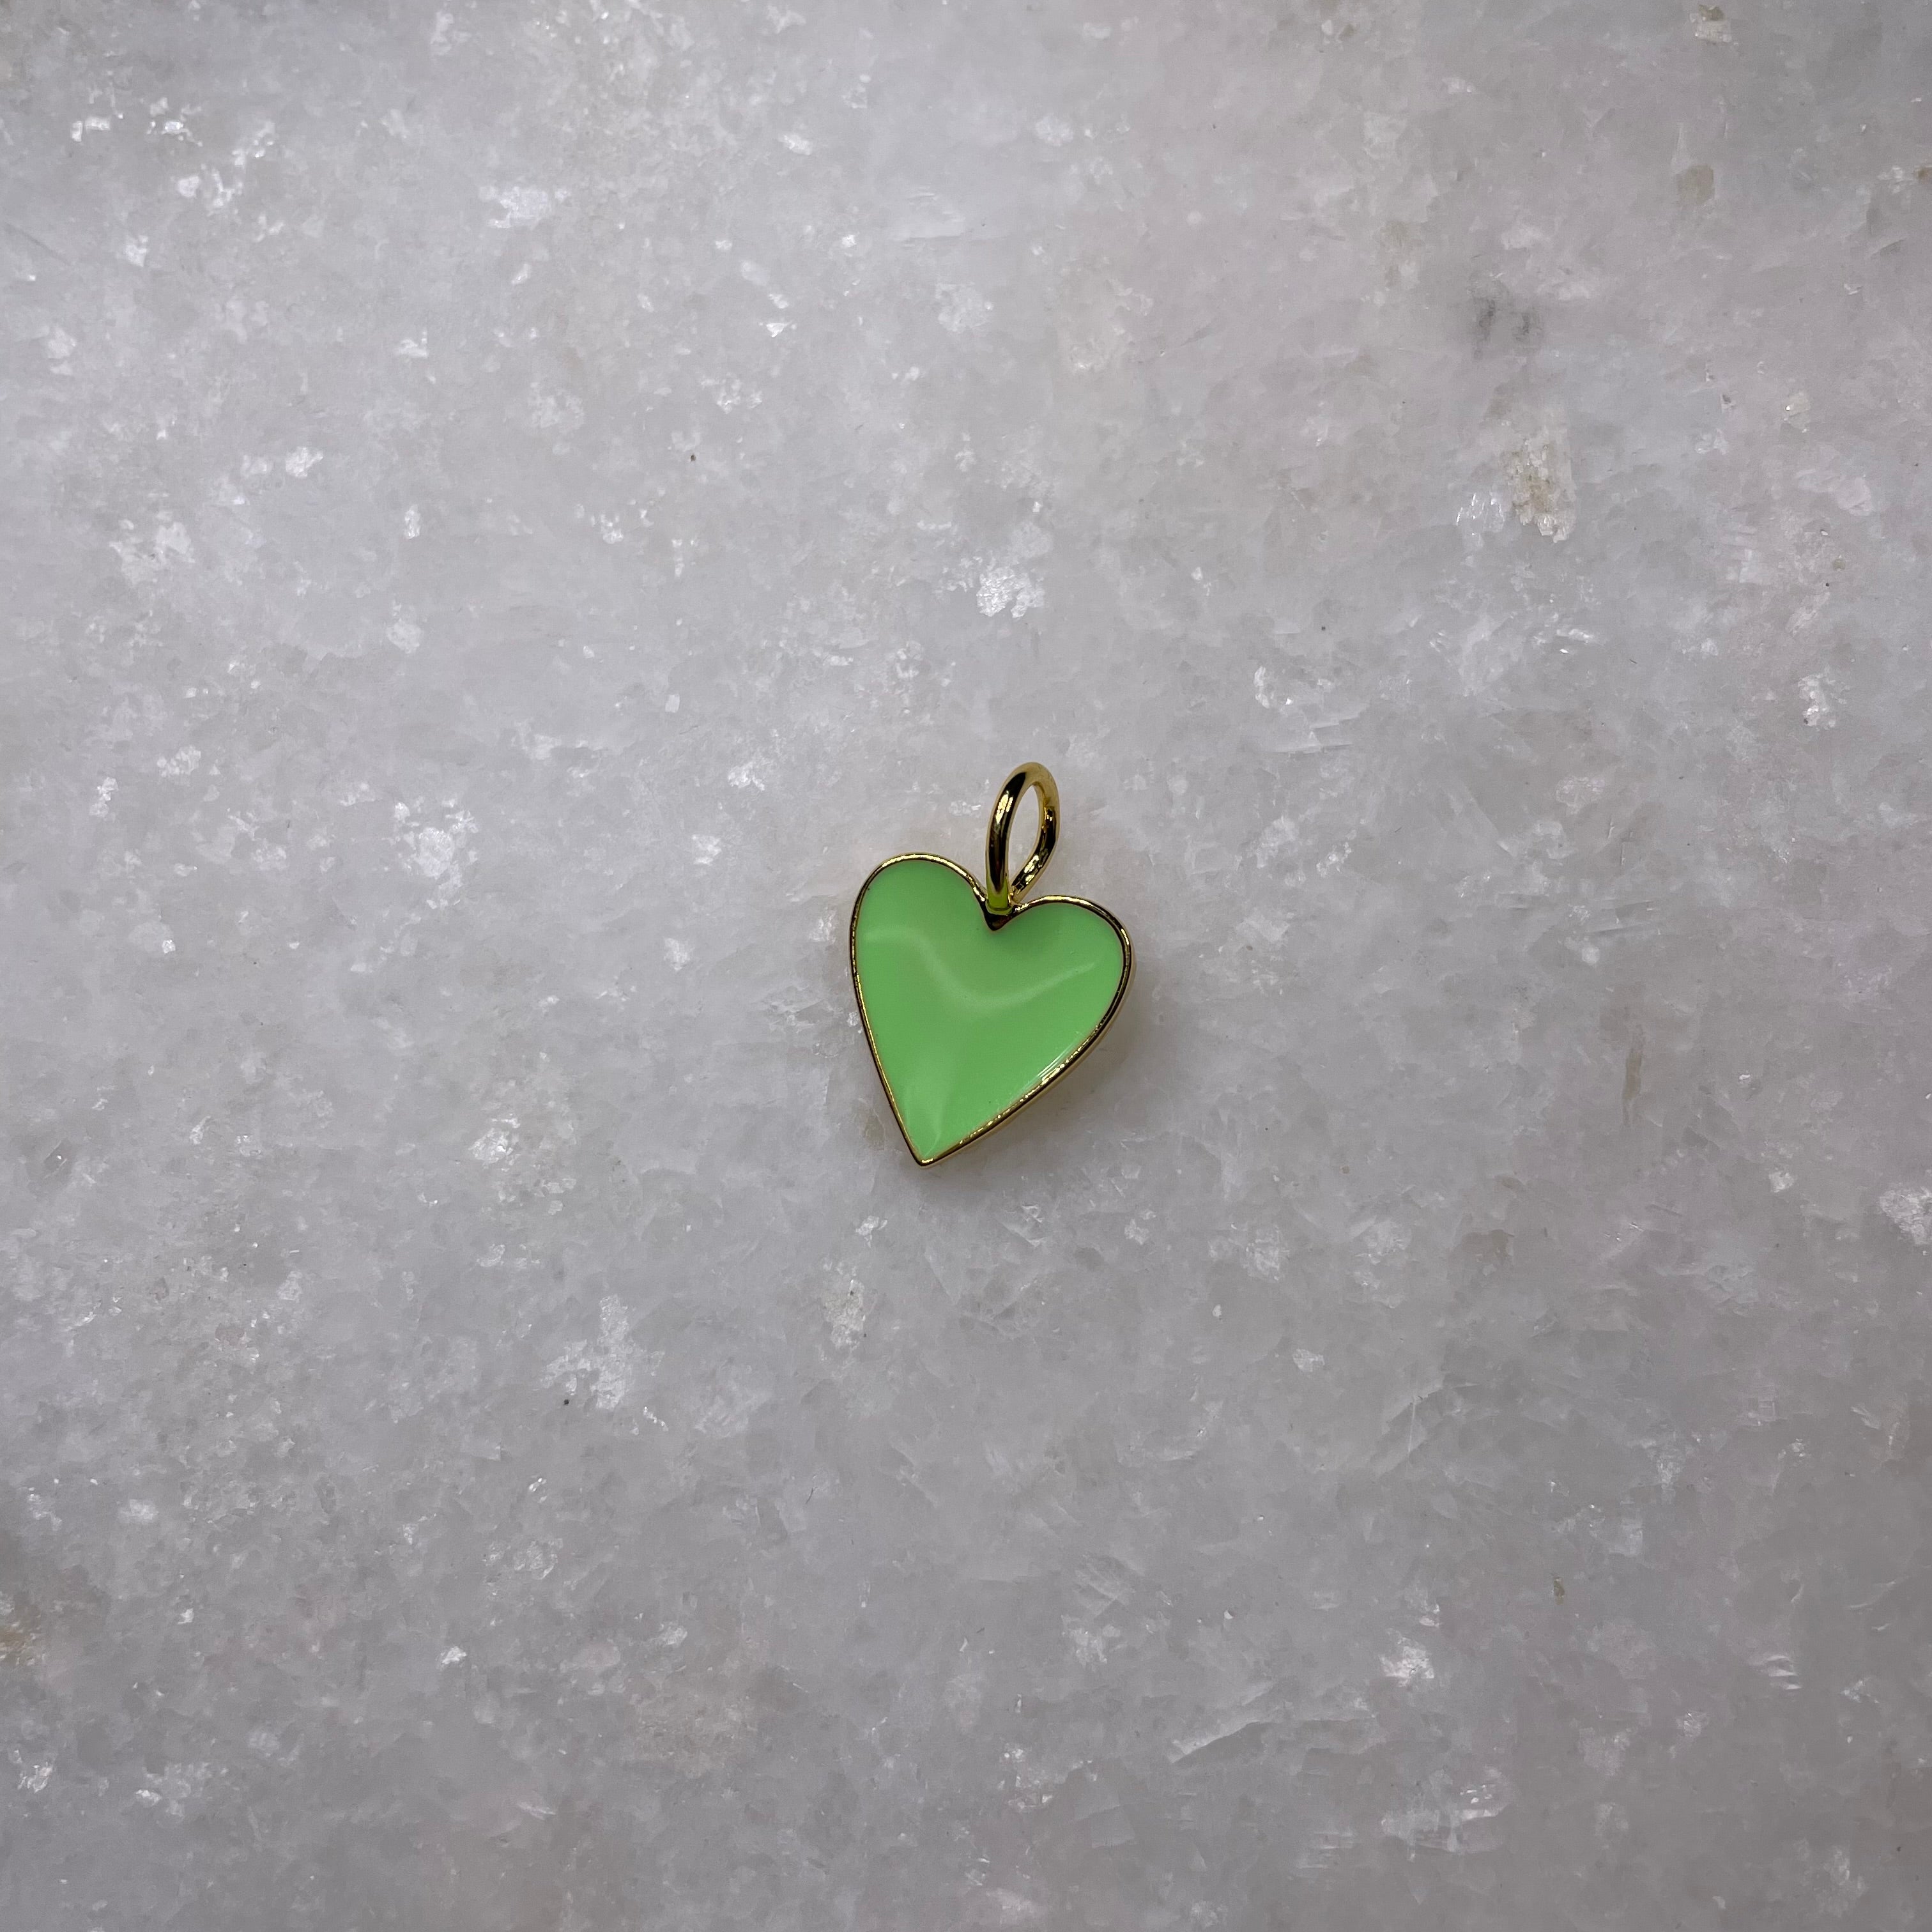 Enamel Heart Charms-Assorted.